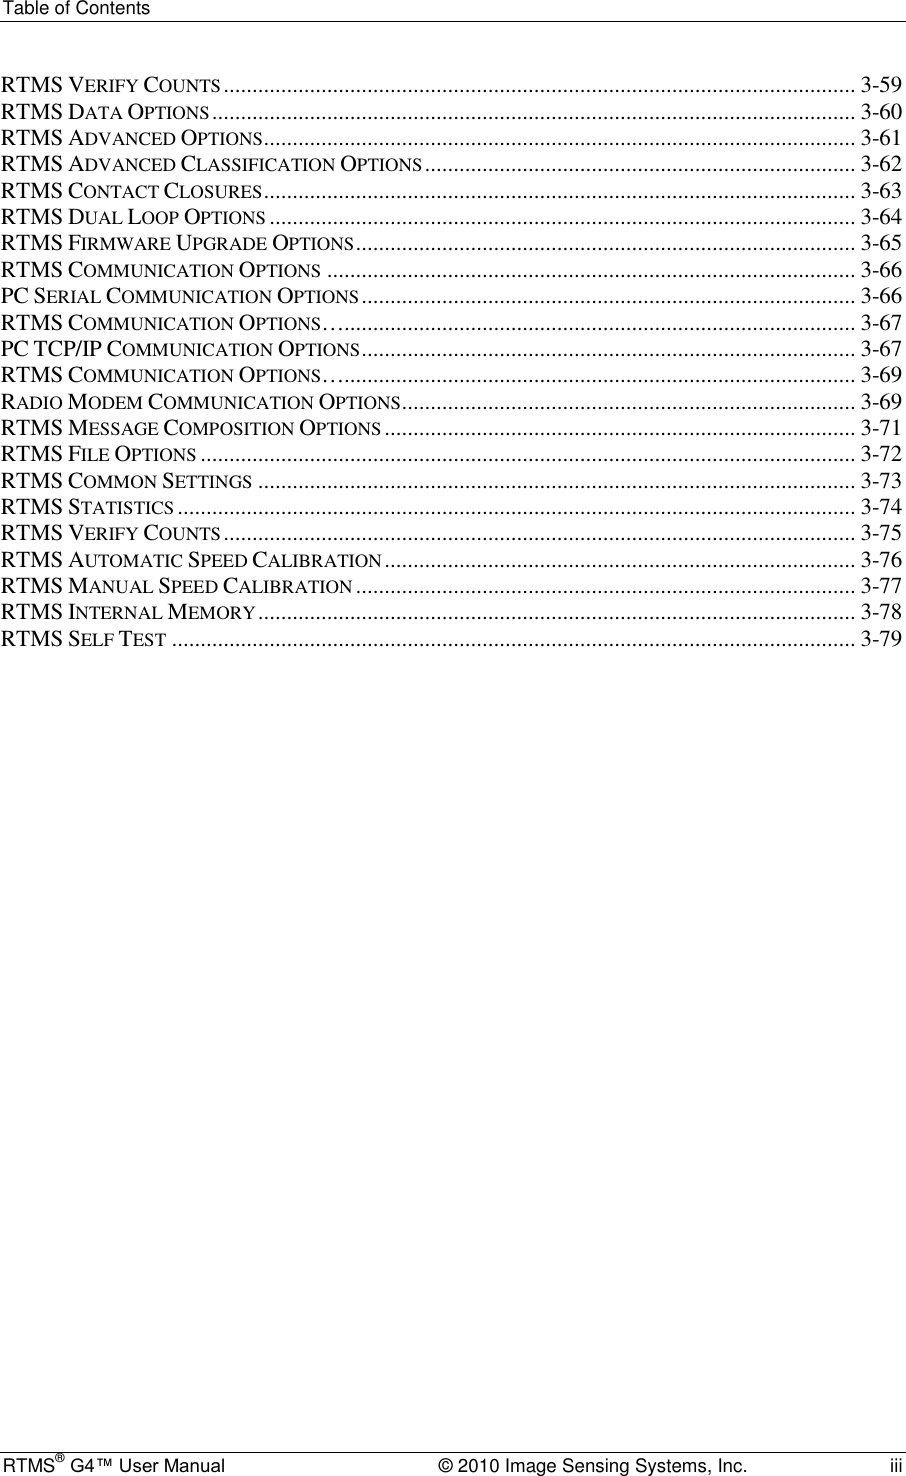 Table of Contents RTMS® G4™ User Manual  © 2010 Image Sensing Systems, Inc.  iii RTMS VERIFY COUNTS .............................................................................................................. 3-59 RTMS DATA OPTIONS ................................................................................................................ 3-60 RTMS ADVANCED OPTIONS ....................................................................................................... 3-61 RTMS ADVANCED CLASSIFICATION OPTIONS ........................................................................... 3-62 RTMS CONTACT CLOSURES ....................................................................................................... 3-63 RTMS DUAL LOOP OPTIONS ...................................................................................................... 3-64 RTMS FIRMWARE UPGRADE OPTIONS ....................................................................................... 3-65 RTMS COMMUNICATION OPTIONS ............................................................................................ 3-66 PC SERIAL COMMUNICATION OPTIONS ...................................................................................... 3-66 RTMS COMMUNICATION OPTIONS…......................................................................................... 3-67 PC TCP/IP COMMUNICATION OPTIONS ...................................................................................... 3-67 RTMS COMMUNICATION OPTIONS…......................................................................................... 3-69 RADIO MODEM COMMUNICATION OPTIONS ............................................................................... 3-69 RTMS MESSAGE COMPOSITION OPTIONS .................................................................................. 3-71 RTMS FILE OPTIONS .................................................................................................................. 3-72 RTMS COMMON SETTINGS ........................................................................................................ 3-73 RTMS STATISTICS ...................................................................................................................... 3-74 RTMS VERIFY COUNTS .............................................................................................................. 3-75 RTMS AUTOMATIC SPEED CALIBRATION .................................................................................. 3-76 RTMS MANUAL SPEED CALIBRATION ....................................................................................... 3-77 RTMS INTERNAL MEMORY ........................................................................................................ 3-78 RTMS SELF TEST ....................................................................................................................... 3-79     